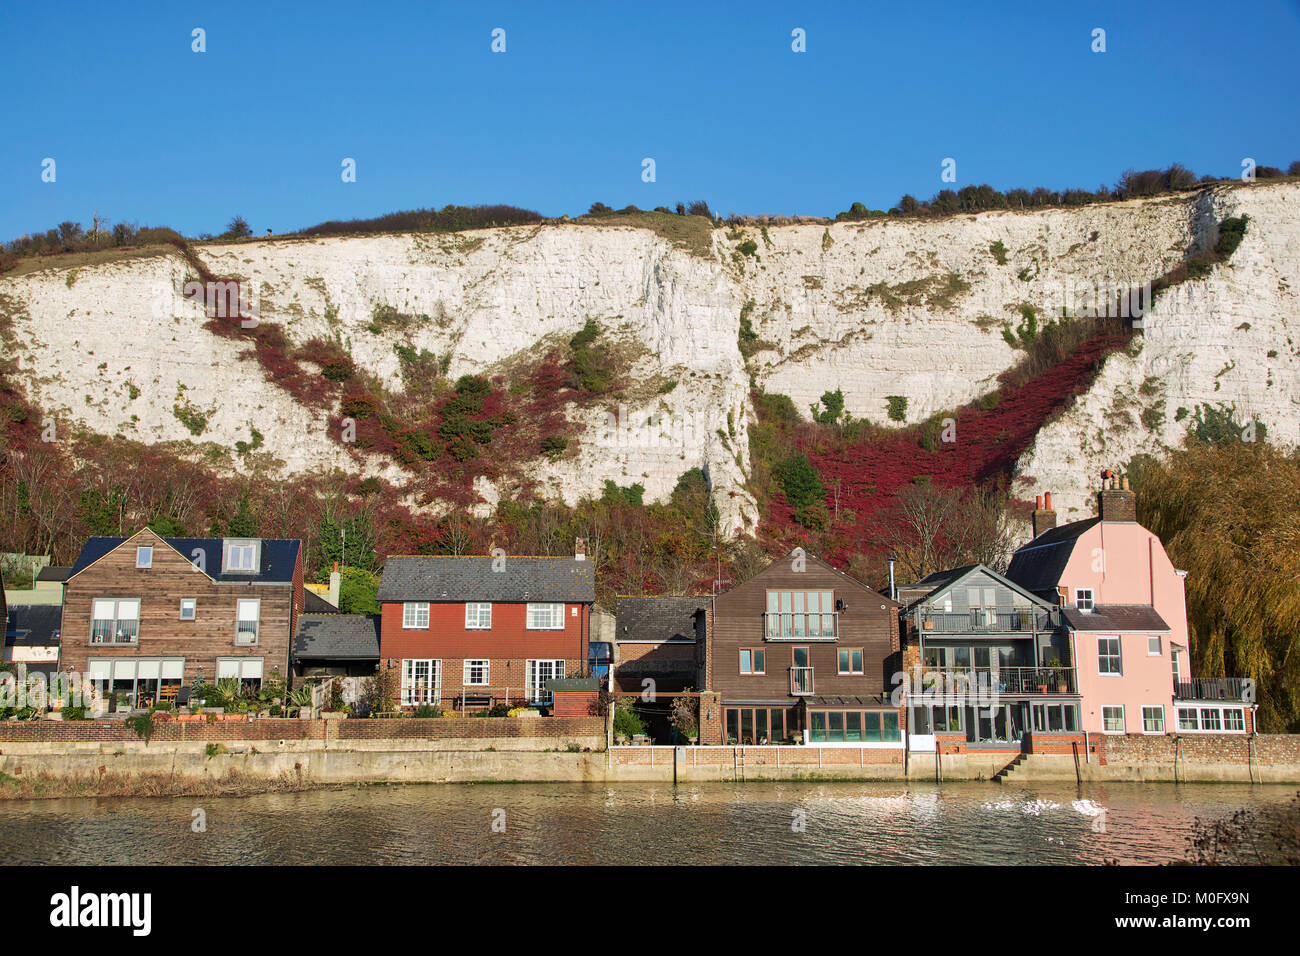 Lewes Cliffe Houses Stock Photo